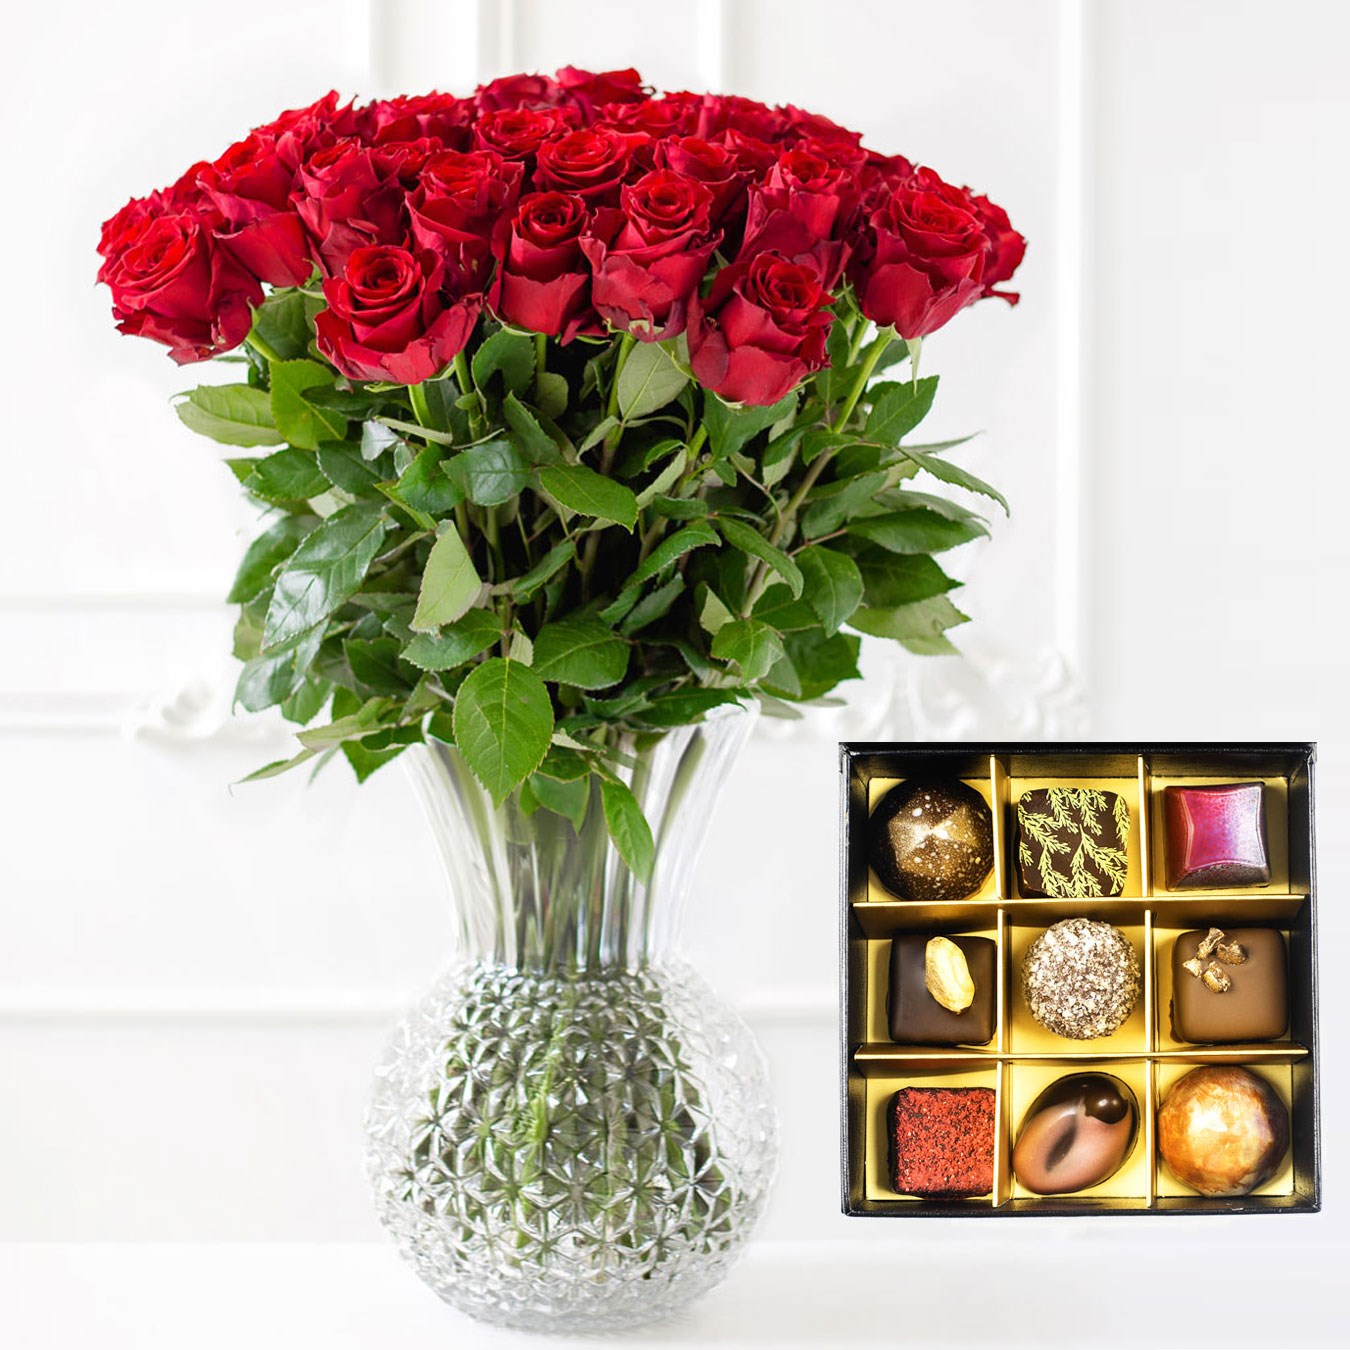 product image for 15 roses and a box of chocolates